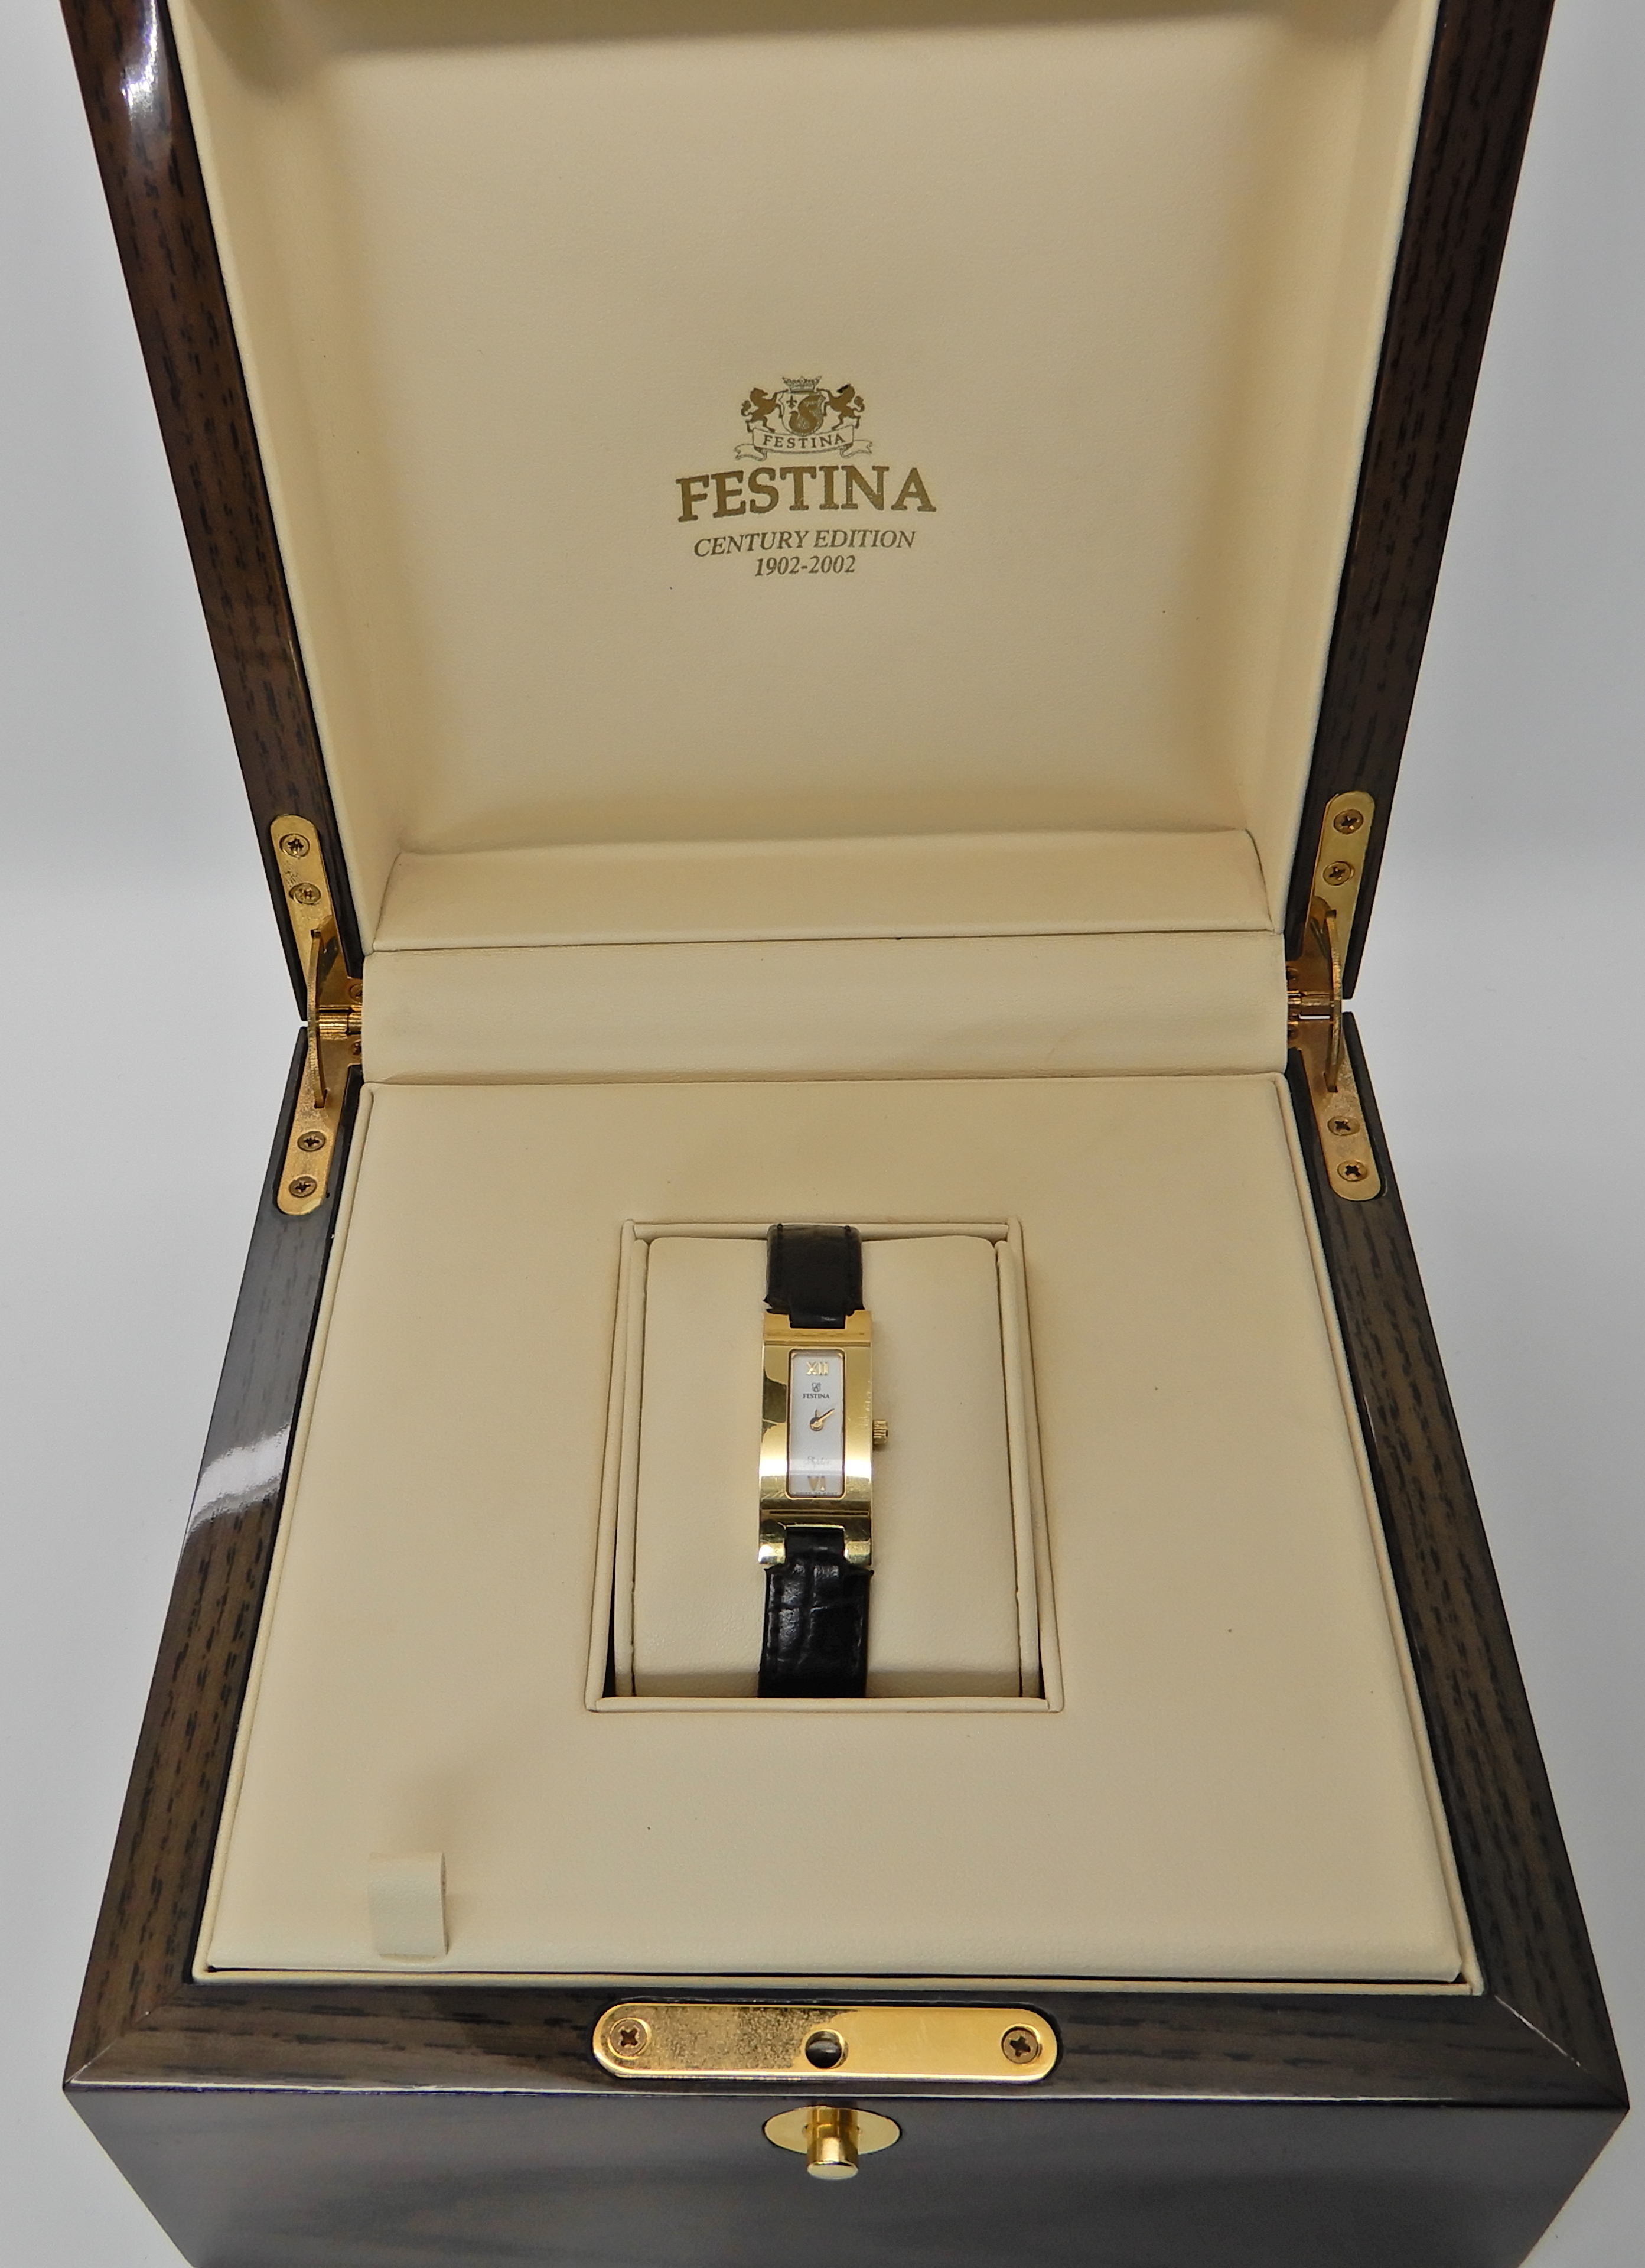 AN 18CT GOLD LADIES FESTINA CENTURY EDITION WATCH 1902 - 2002 the classic oblong case and white dial